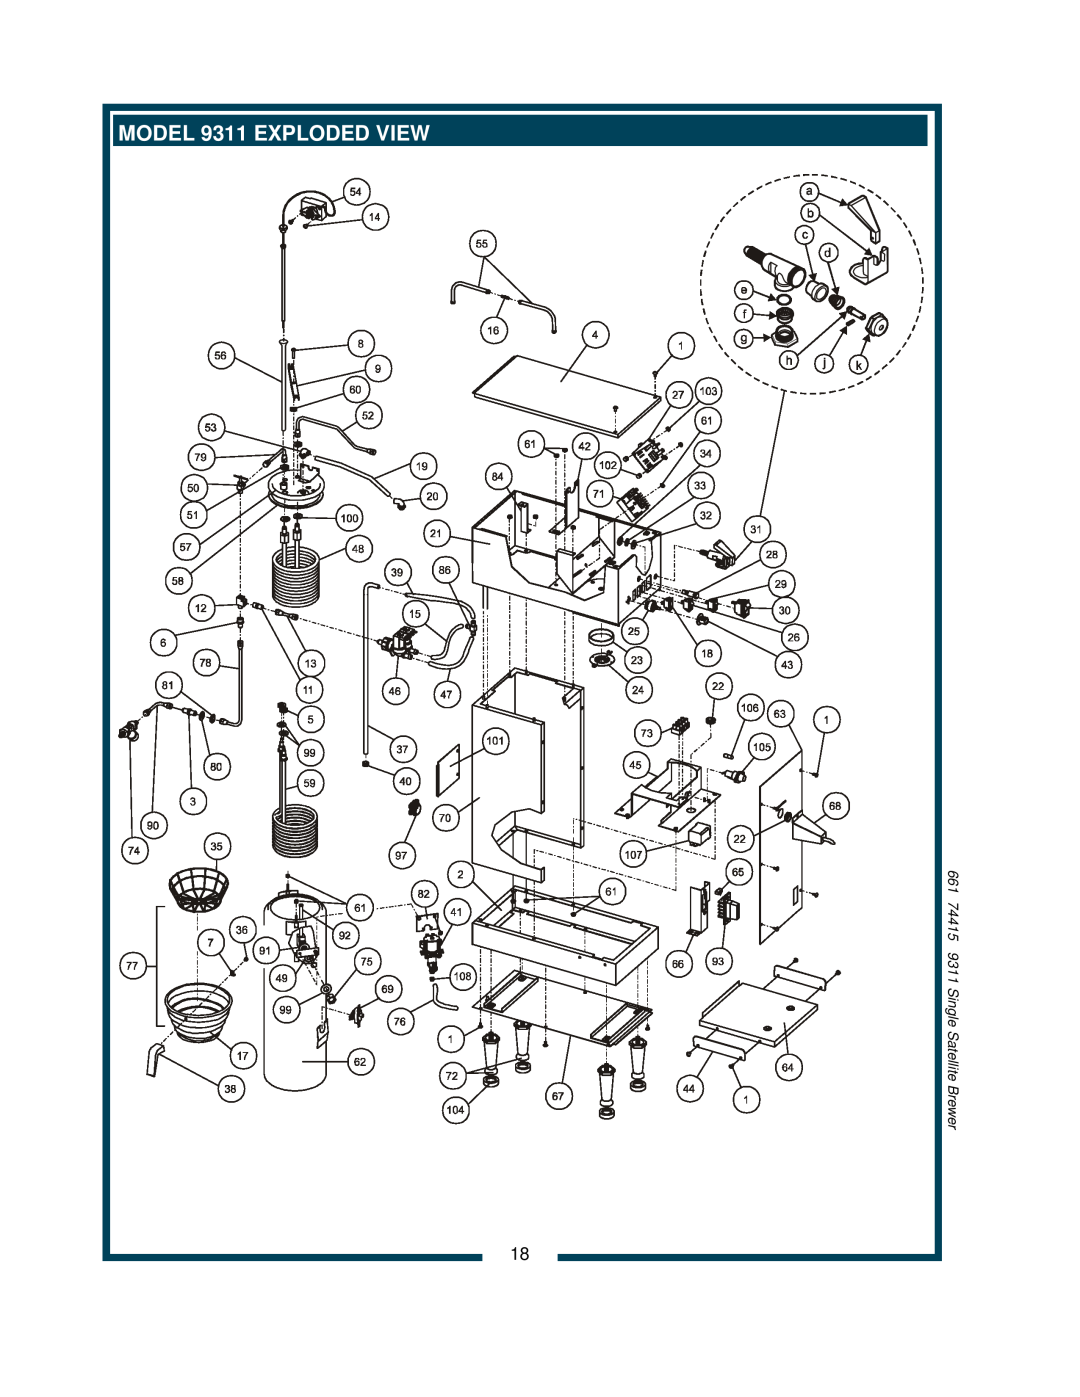 Bloomfield owner manual MODEL 9311 EXPLODED VIEW, 74415, Single Satellite Brewer 